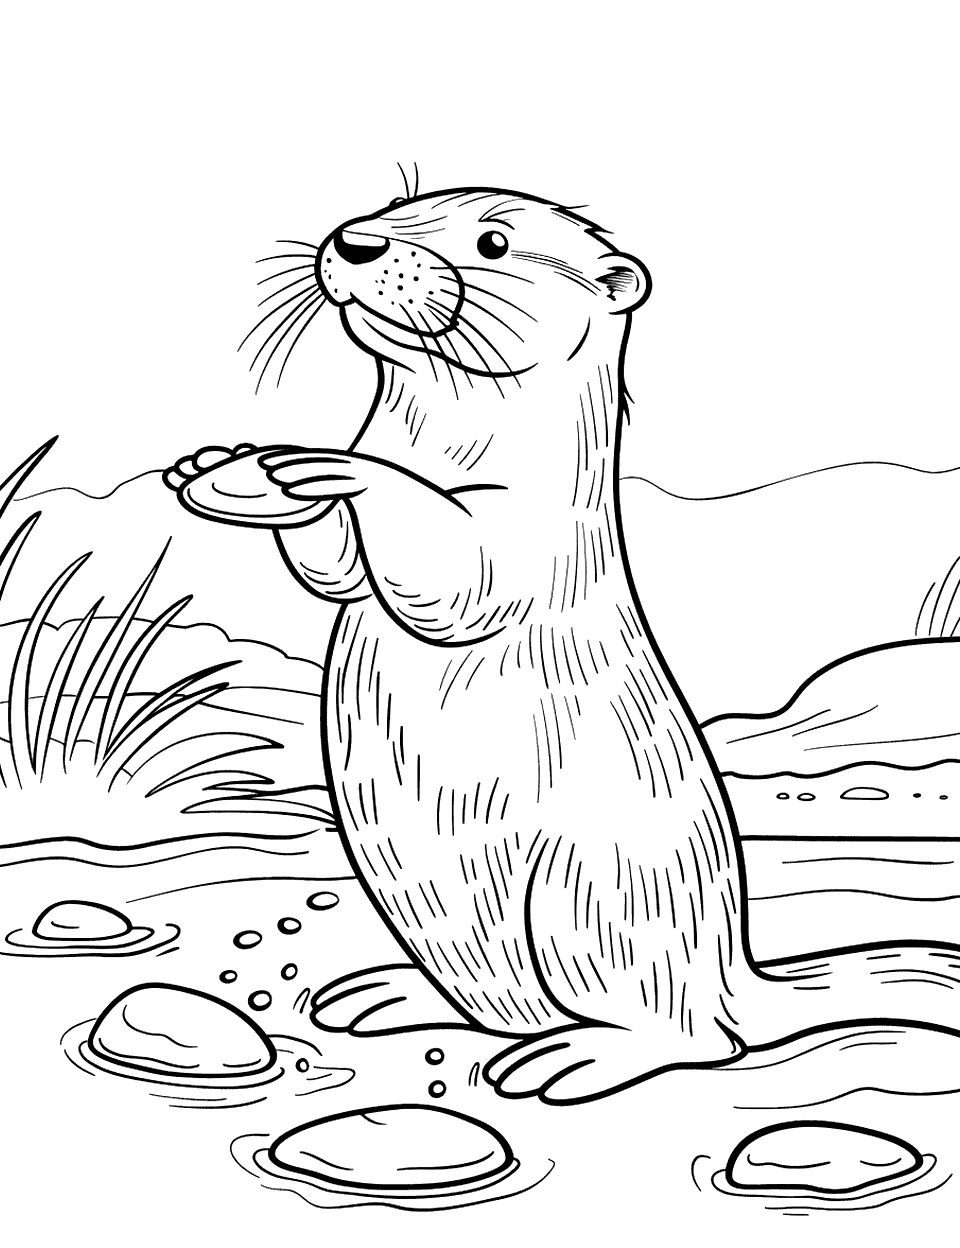 Otter and Stones Coloring Page - A playful otter checking out smooth river stones by the water’s edge.